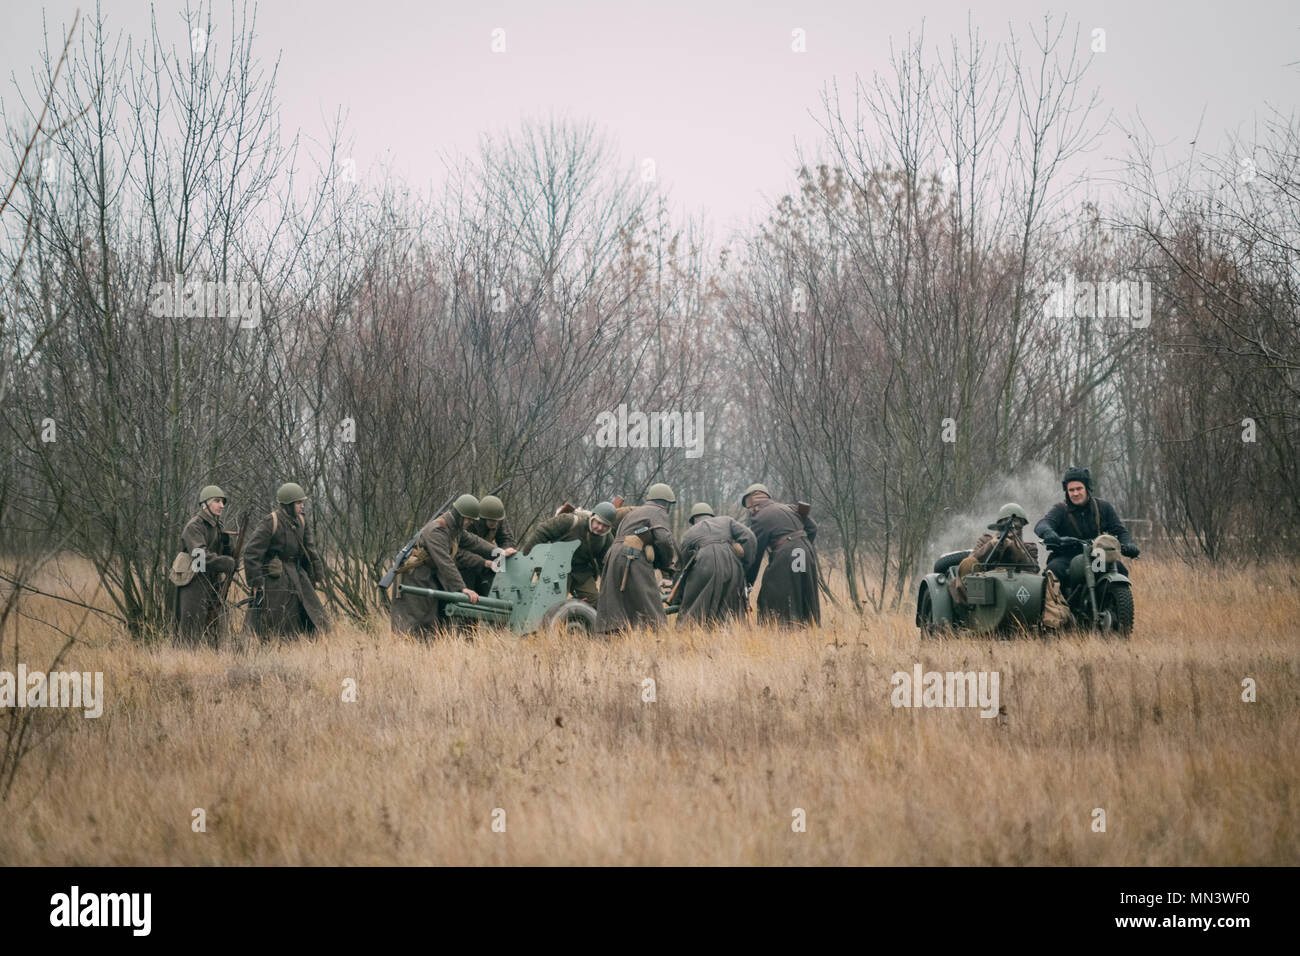 Gomel, Belarus - November 26, 2017: Soldiers of the Red Army deploy a cannon for battle in the autumn field. Reconstruction of the battle for the libe Stock Photo